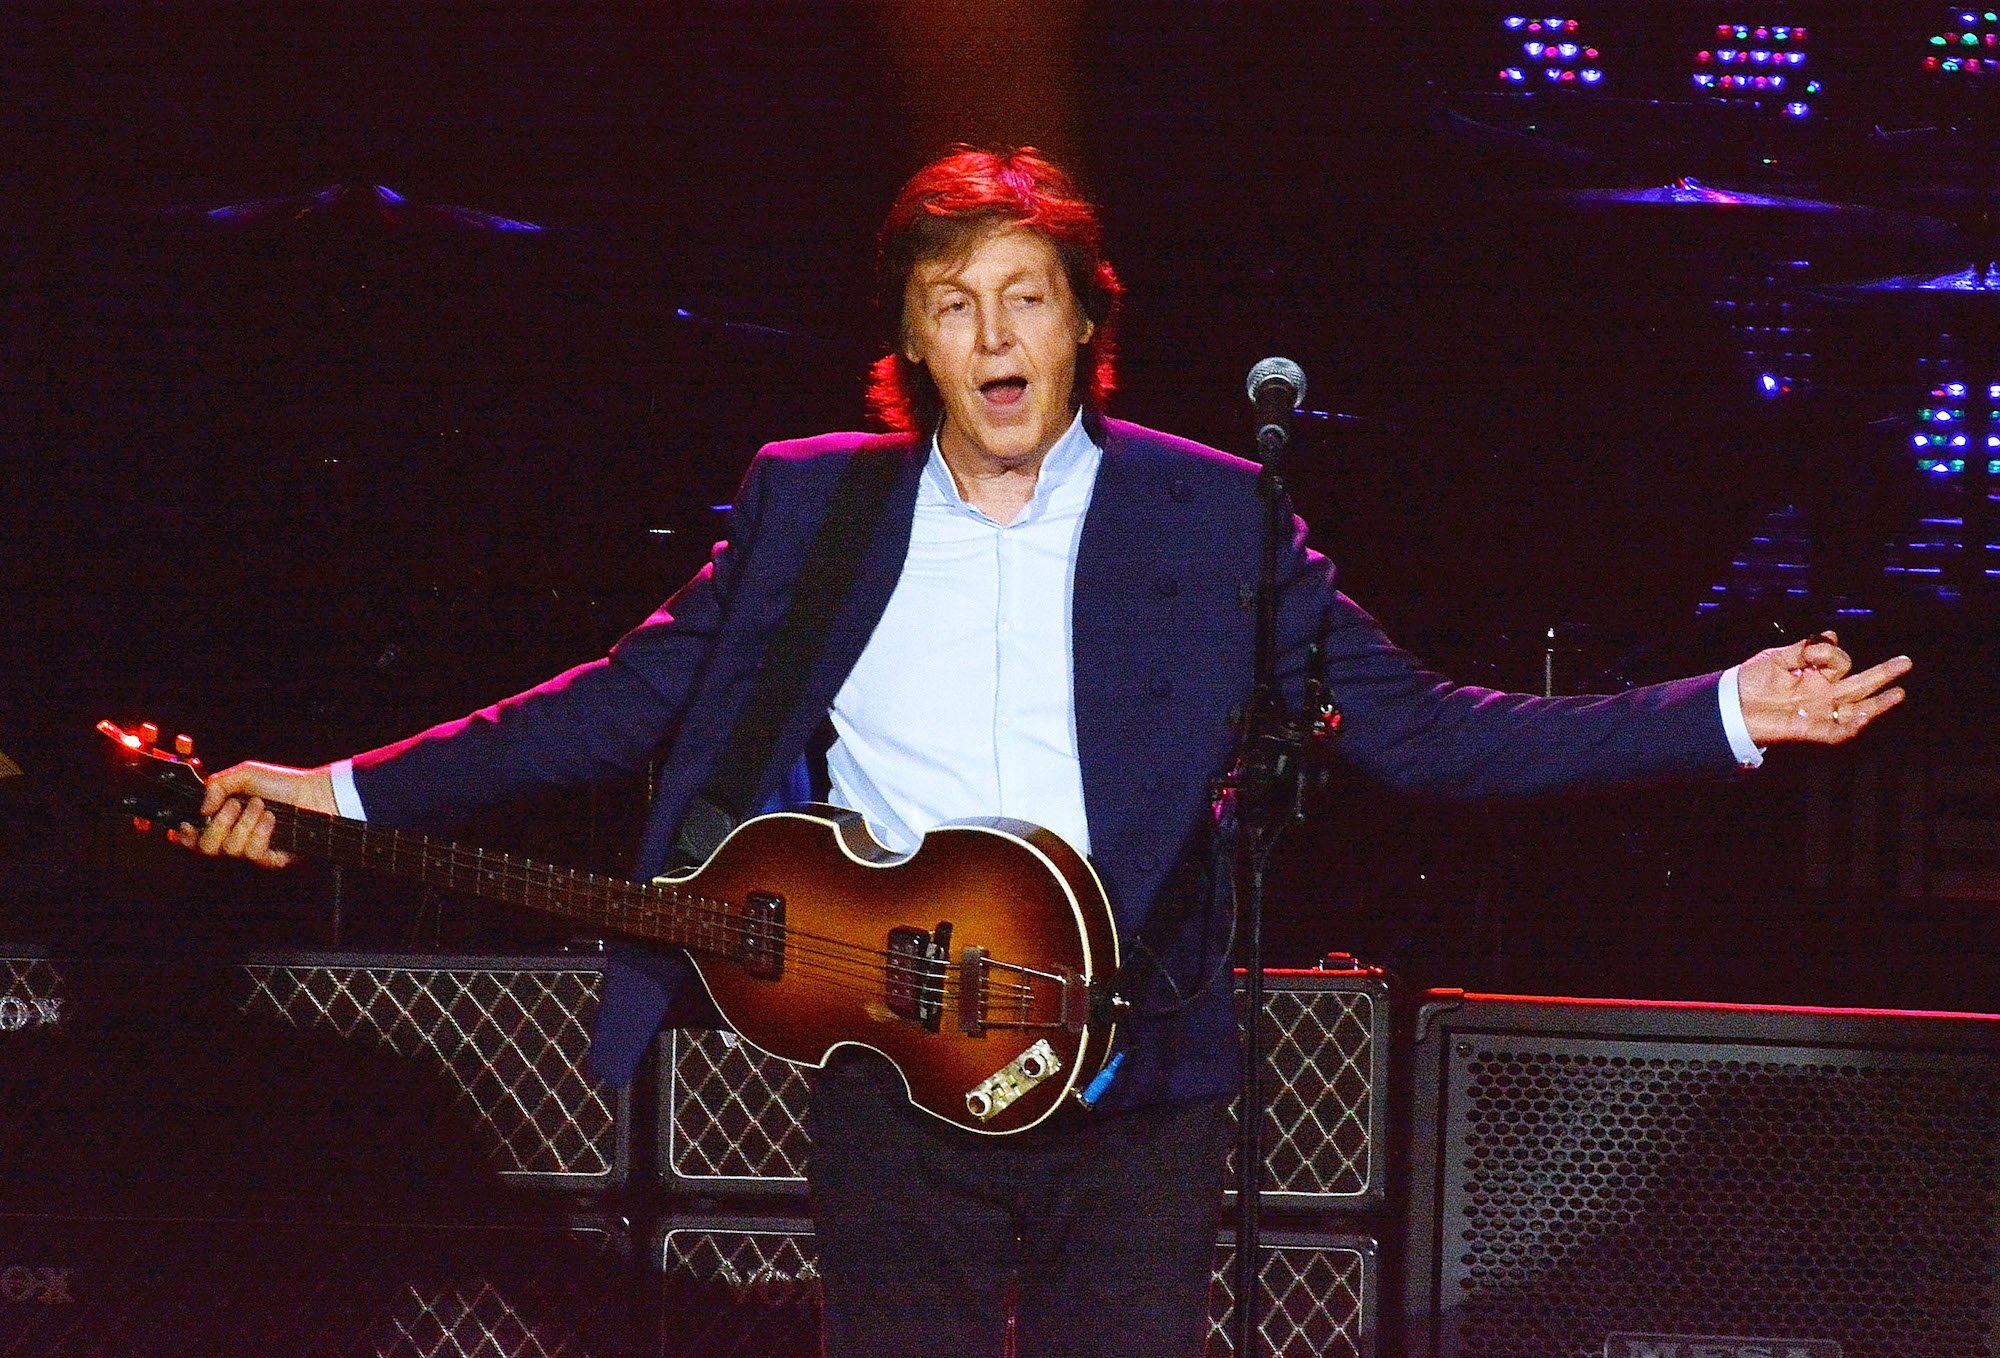 Paul McCartney performs at the O2 Arena in London, England in 2015